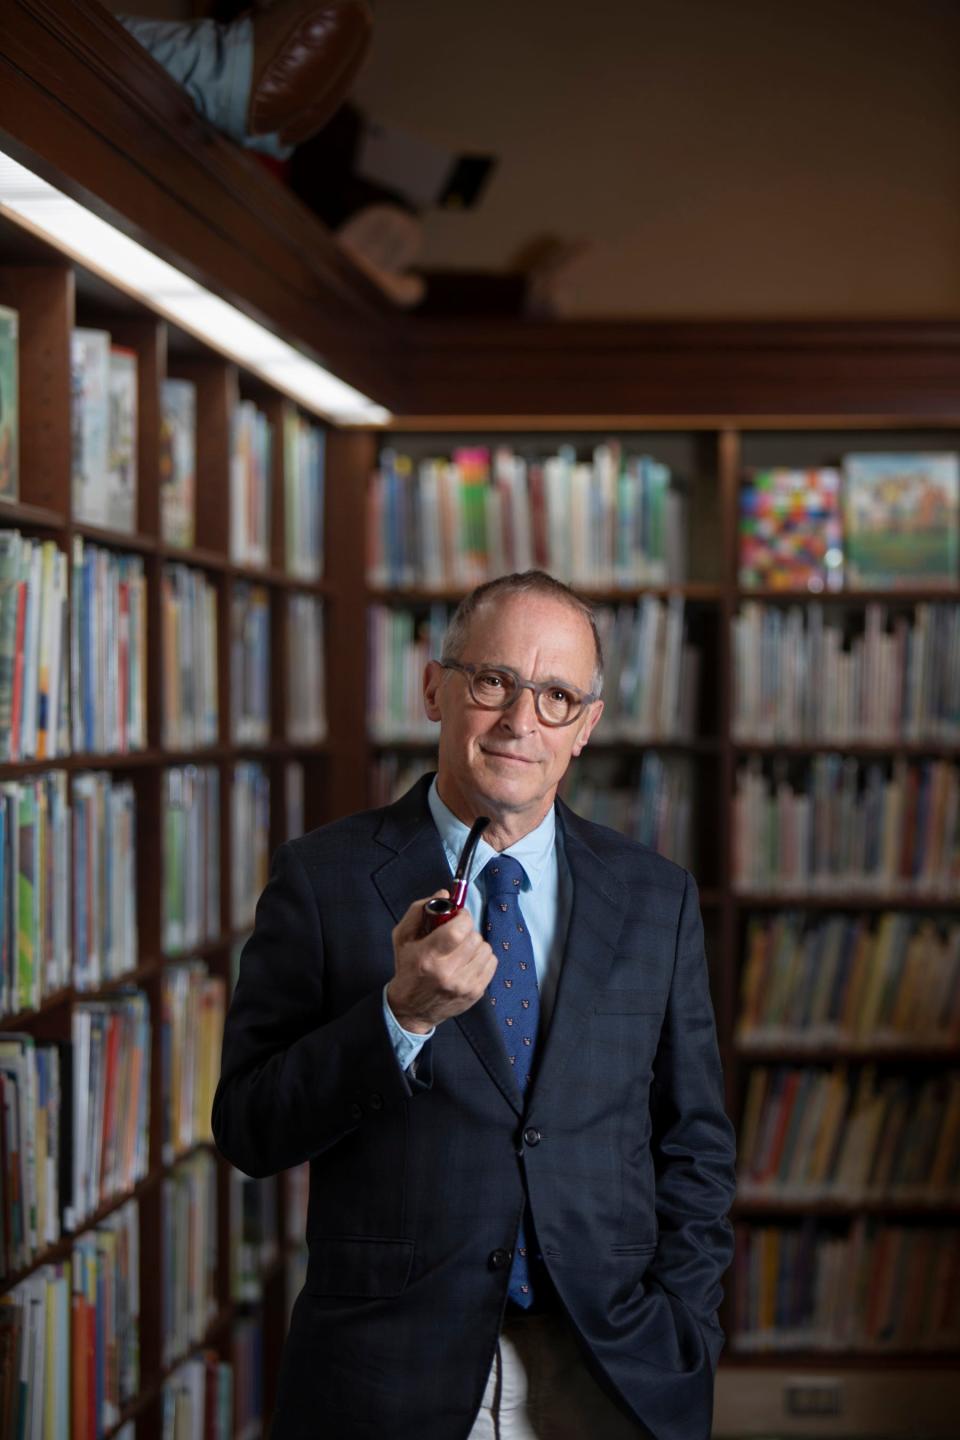 WOSU will present an evening with bestselling author David Sedaris at the Palace Theatre on Monday.